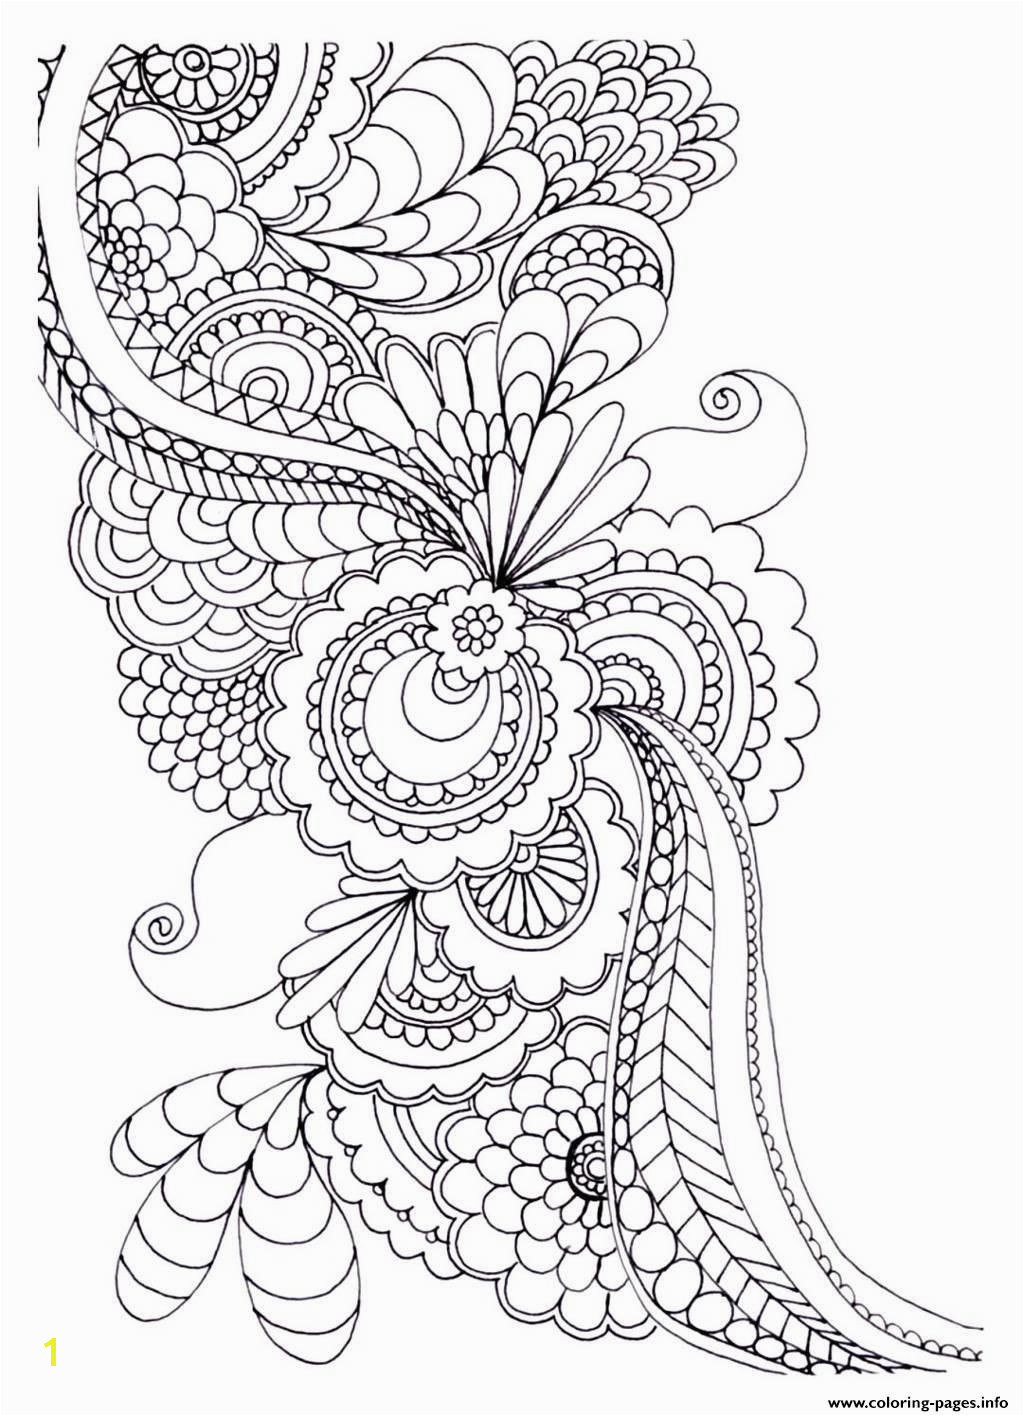 Flower Coloring Pages Printable for Adults Flower Coloring Pages for Adults Coloring Home